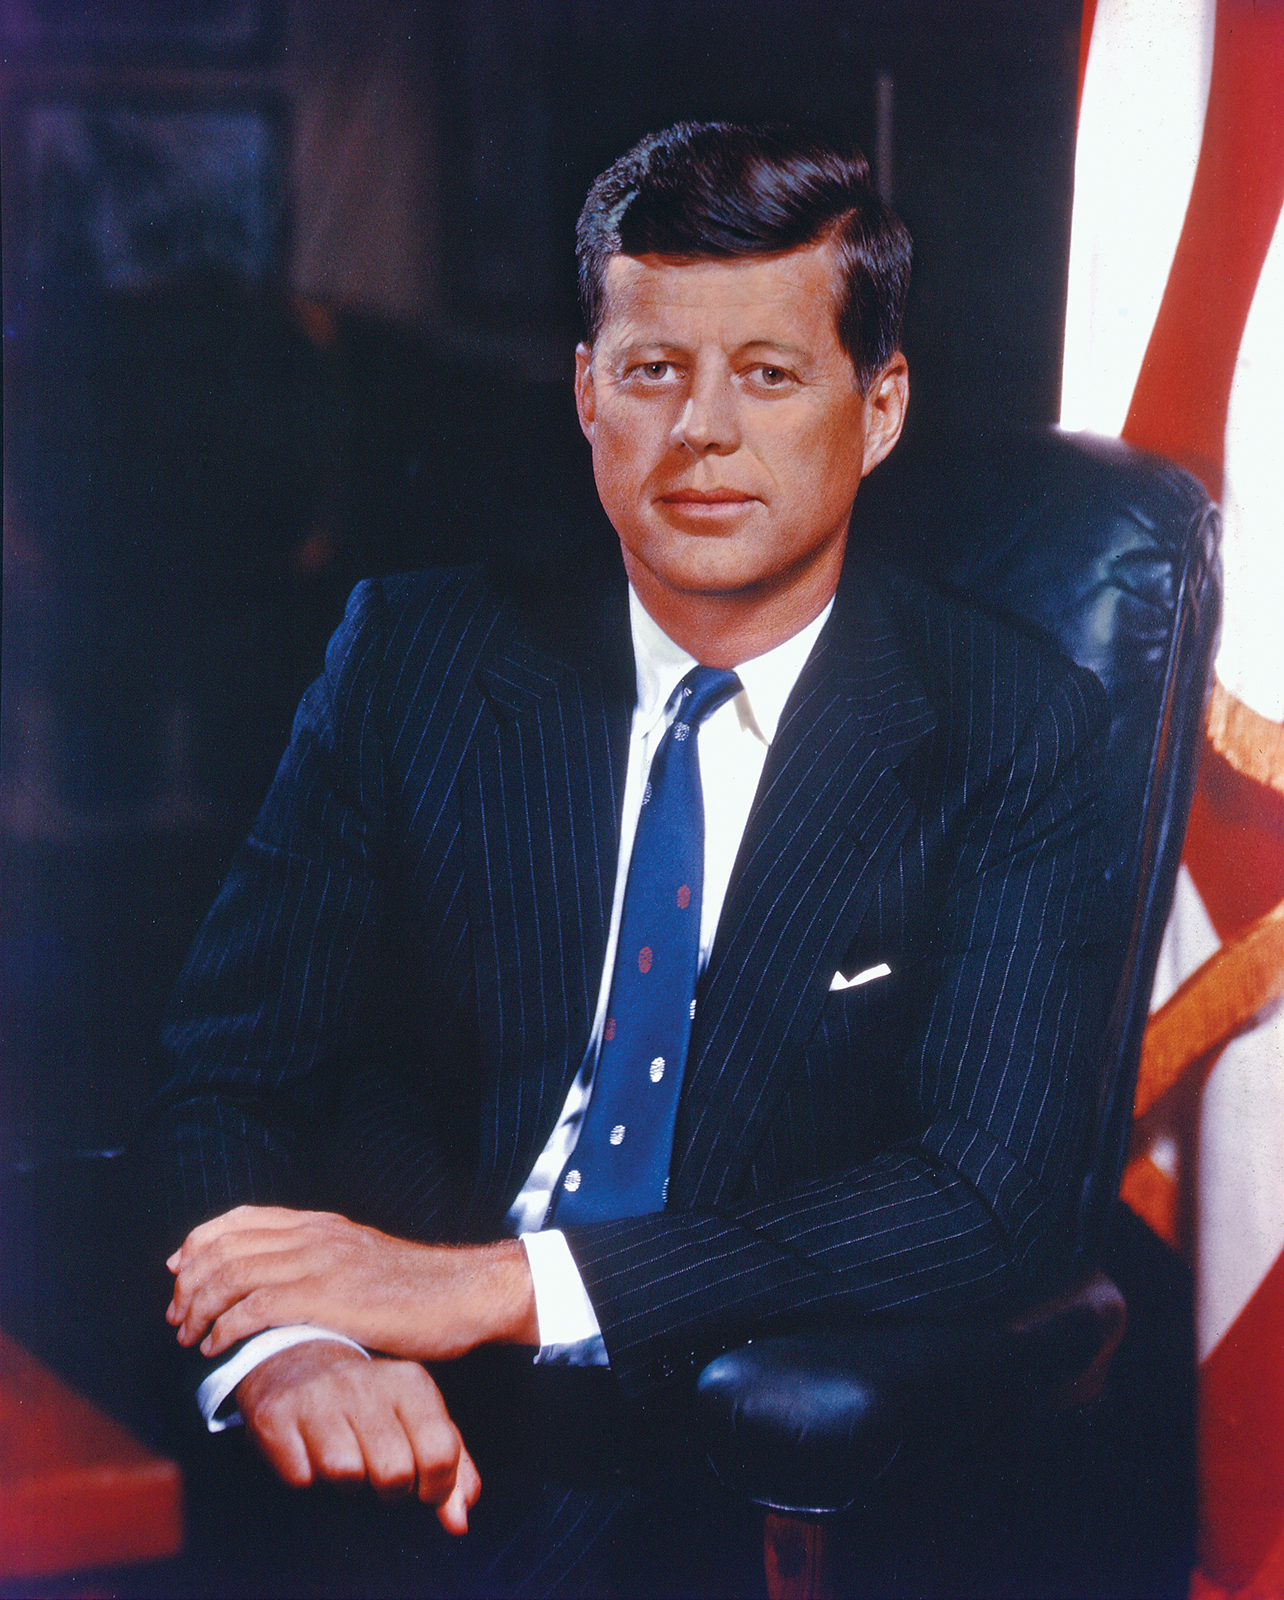 Presidential portrait of John F Kennedy dressed in a suit with a blue tie and next to the Flag of the United States.